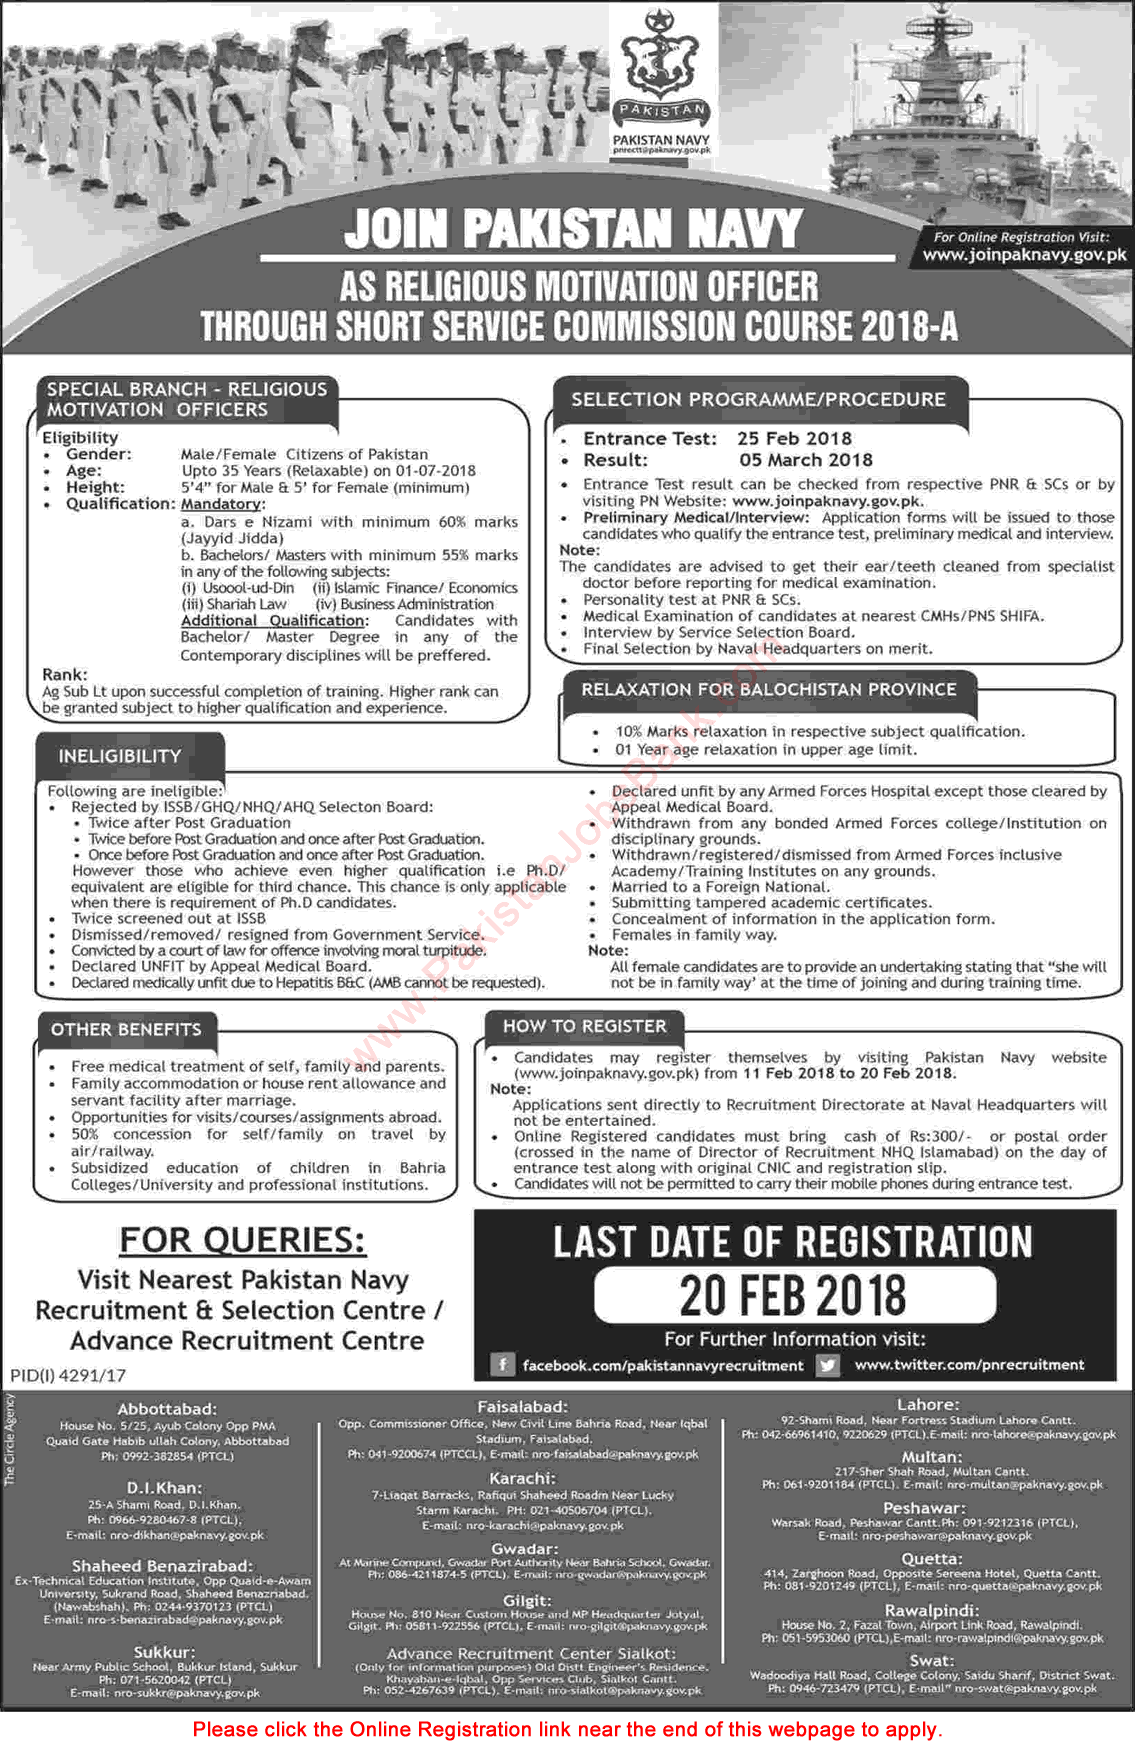 Join Pakistan Navy as Religious Motivation Officer 2018 through Short Service Commission Course Online Registration Latest